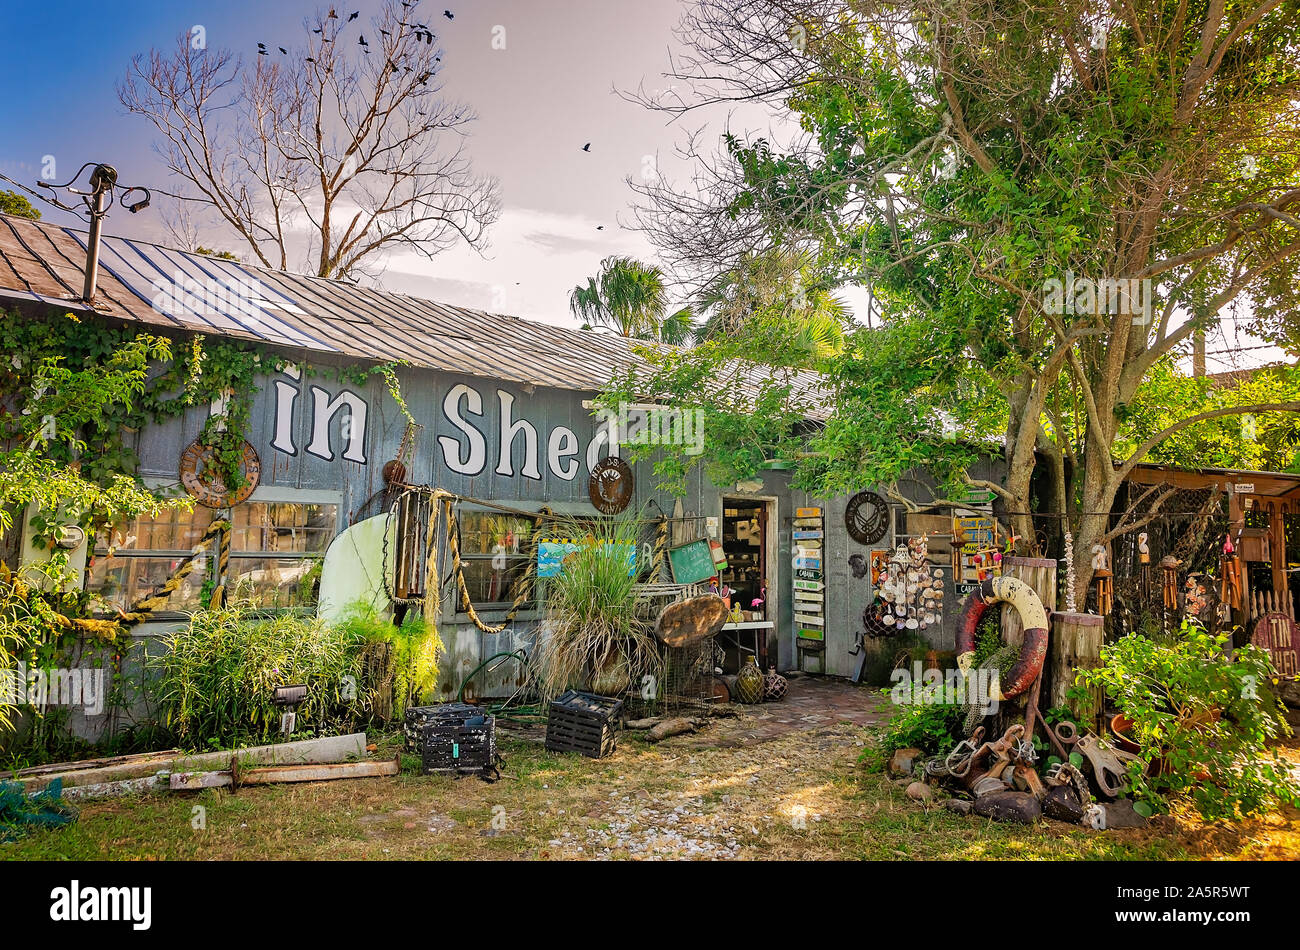 The exterior of The Tin Shed is pictured, Oct. 6, 2019, in Apalachicola, Florida. The store sells antique and reproduction nautical memorabilia. Stock Photo